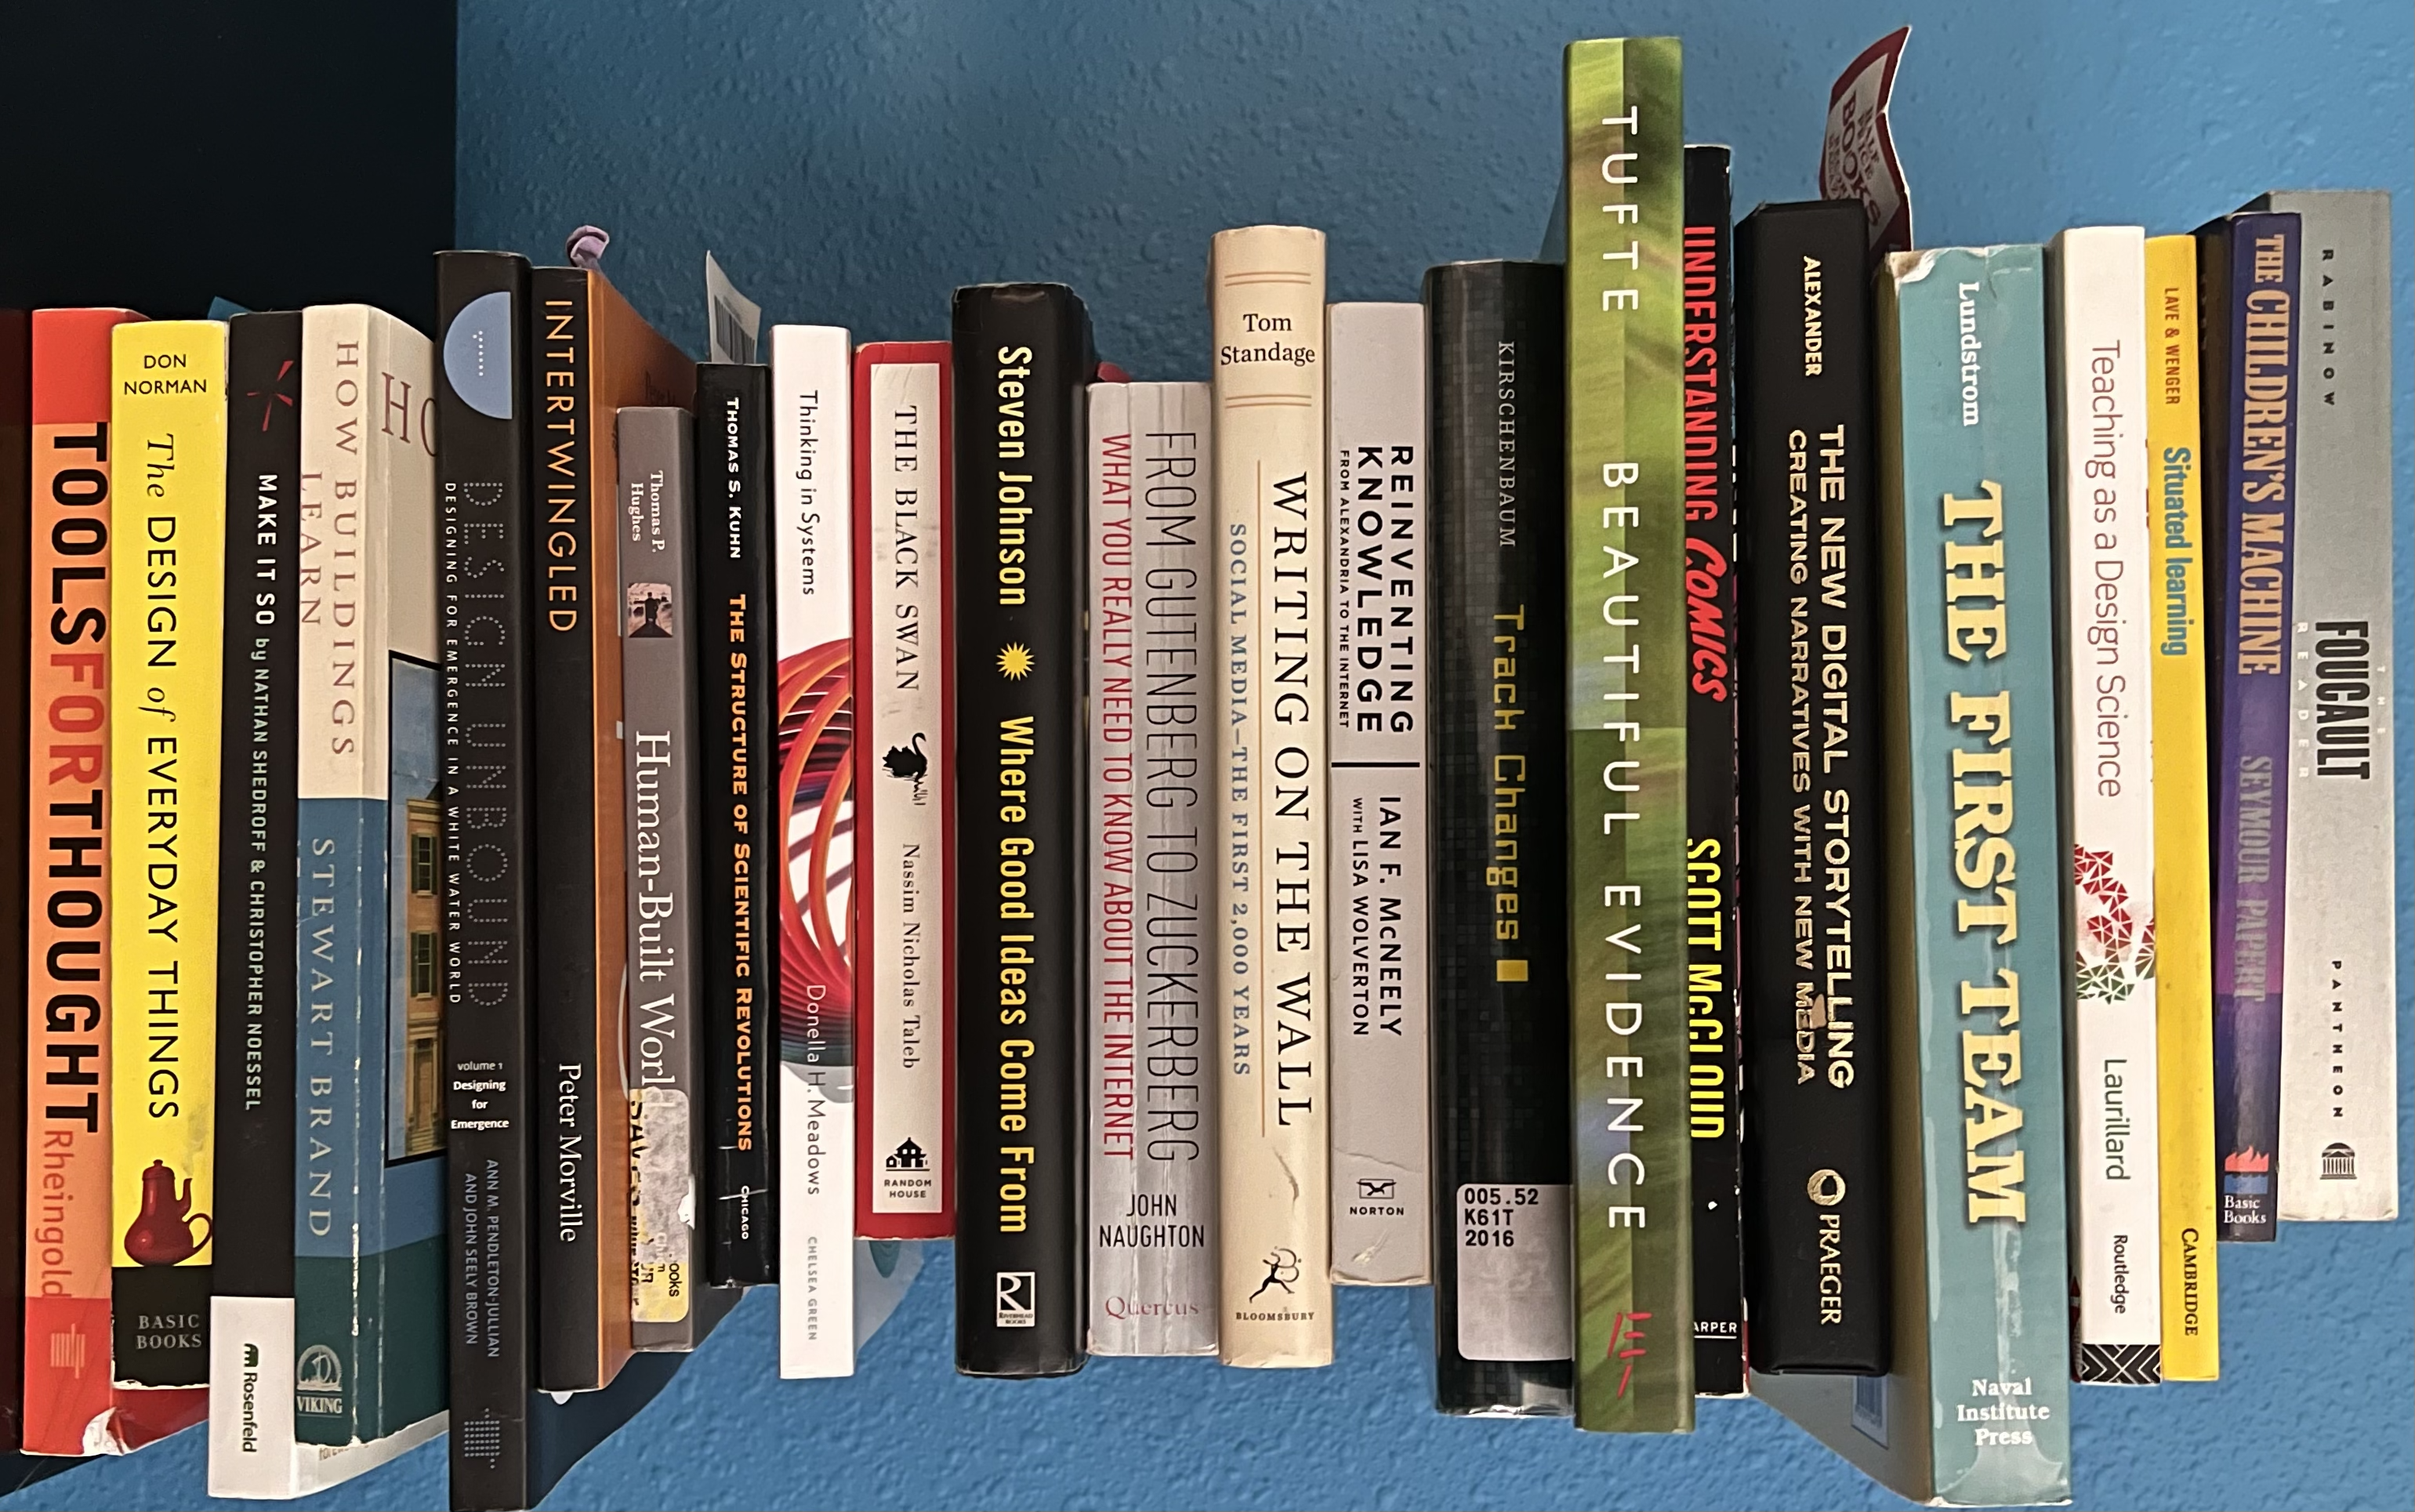 Books from the 25 Books Every Technologist Should Read - Missing Learning War, Mathematical Theory of Communication, and Antifragile as I only have them on Kindle